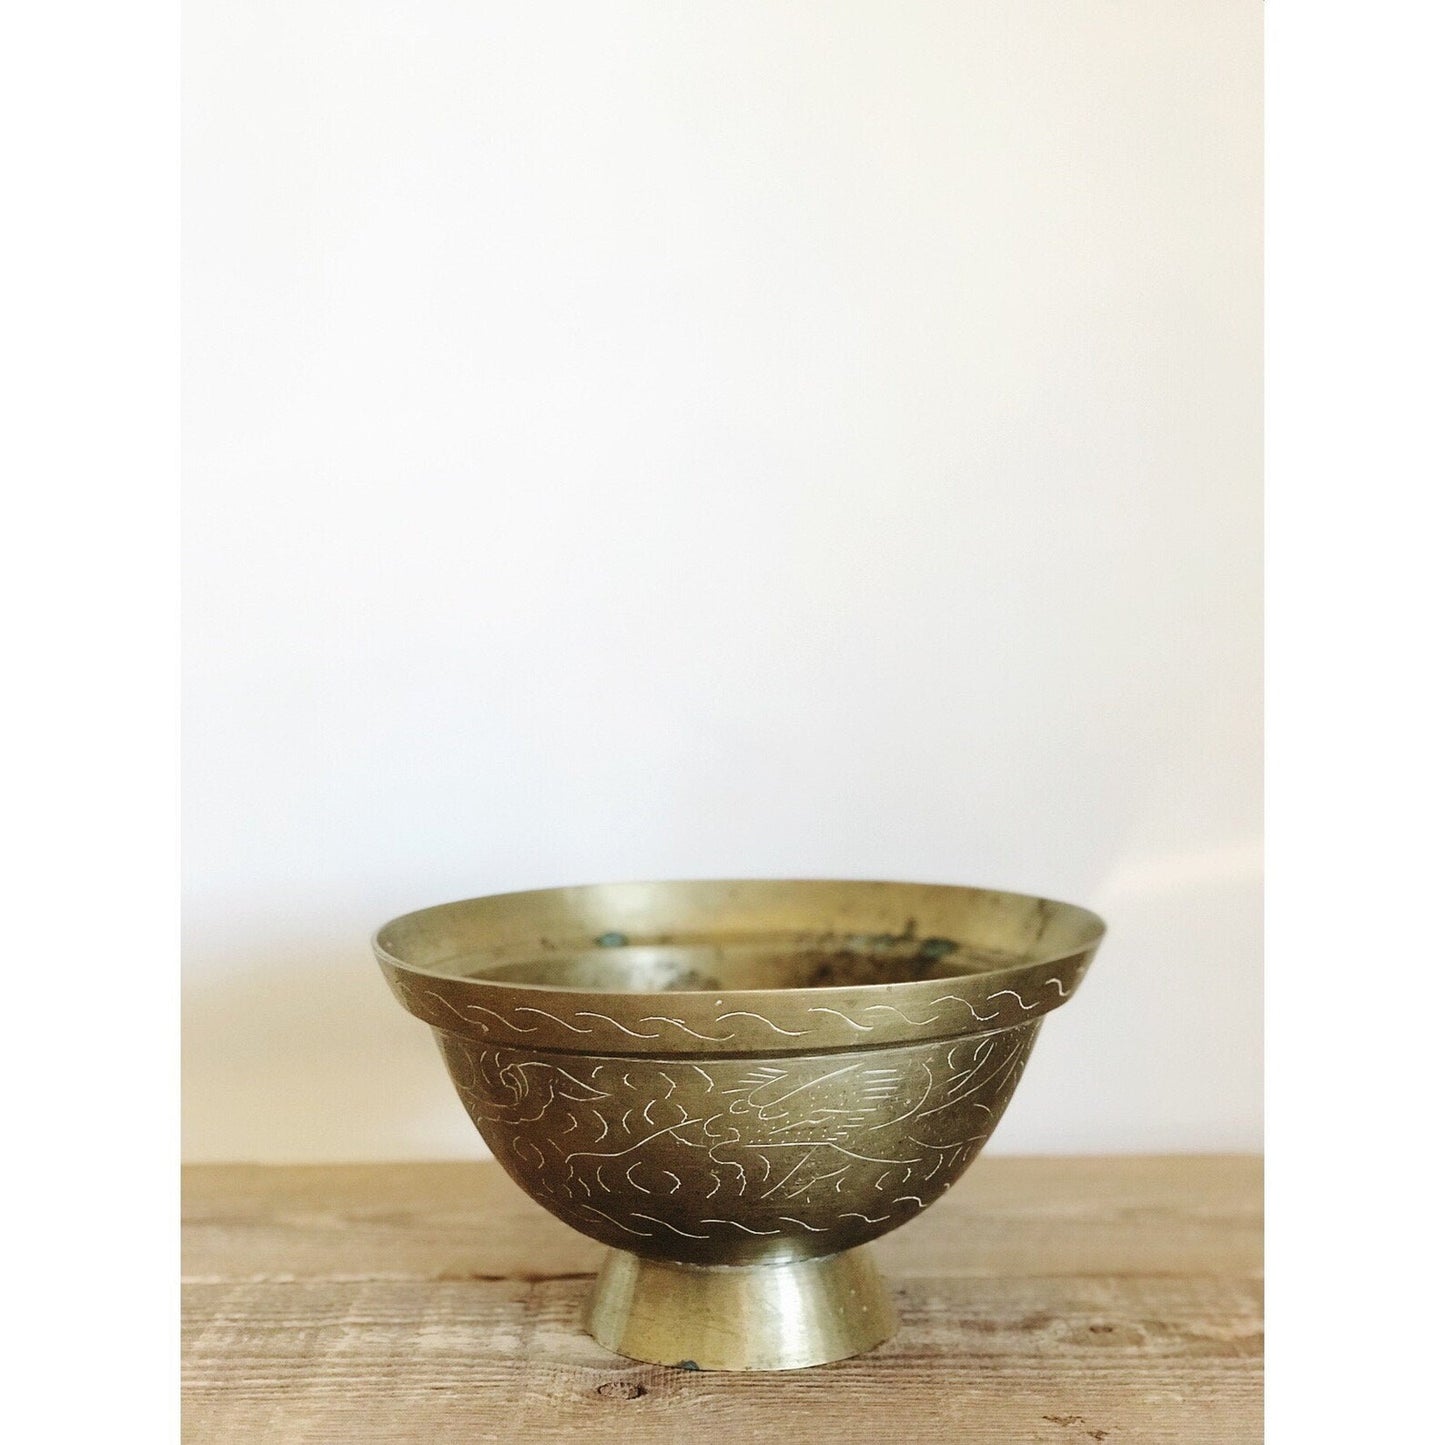 Etched Brass Footed Bowl / Decorative Vintage Brass Bowl